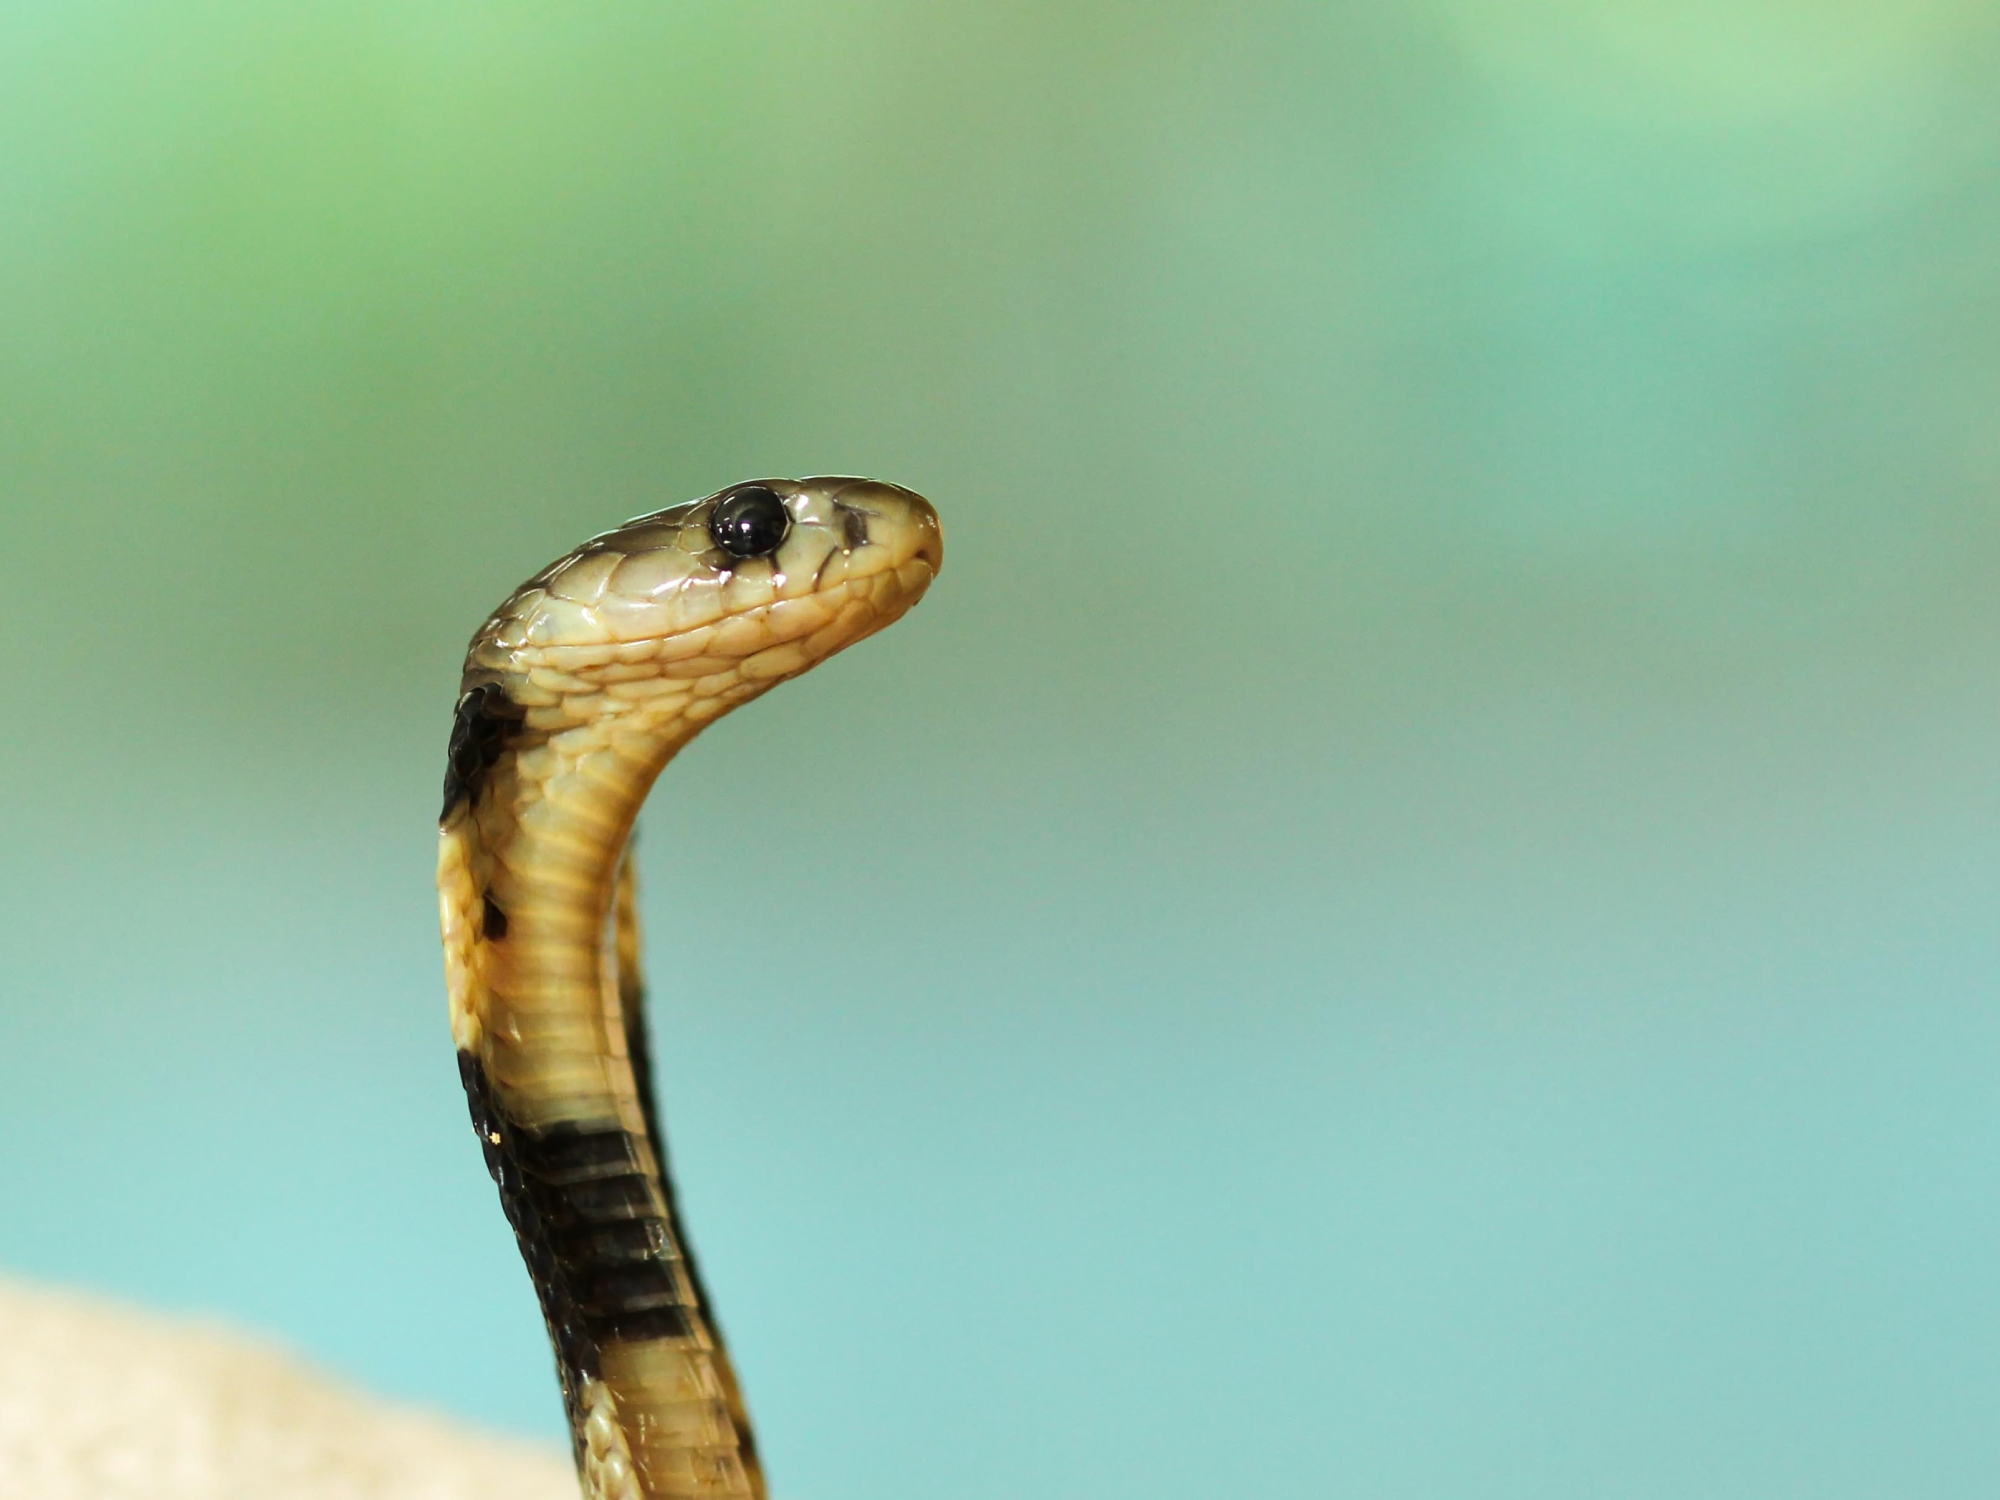 The best ways to wrangle, repel, and just get snakes out of your home